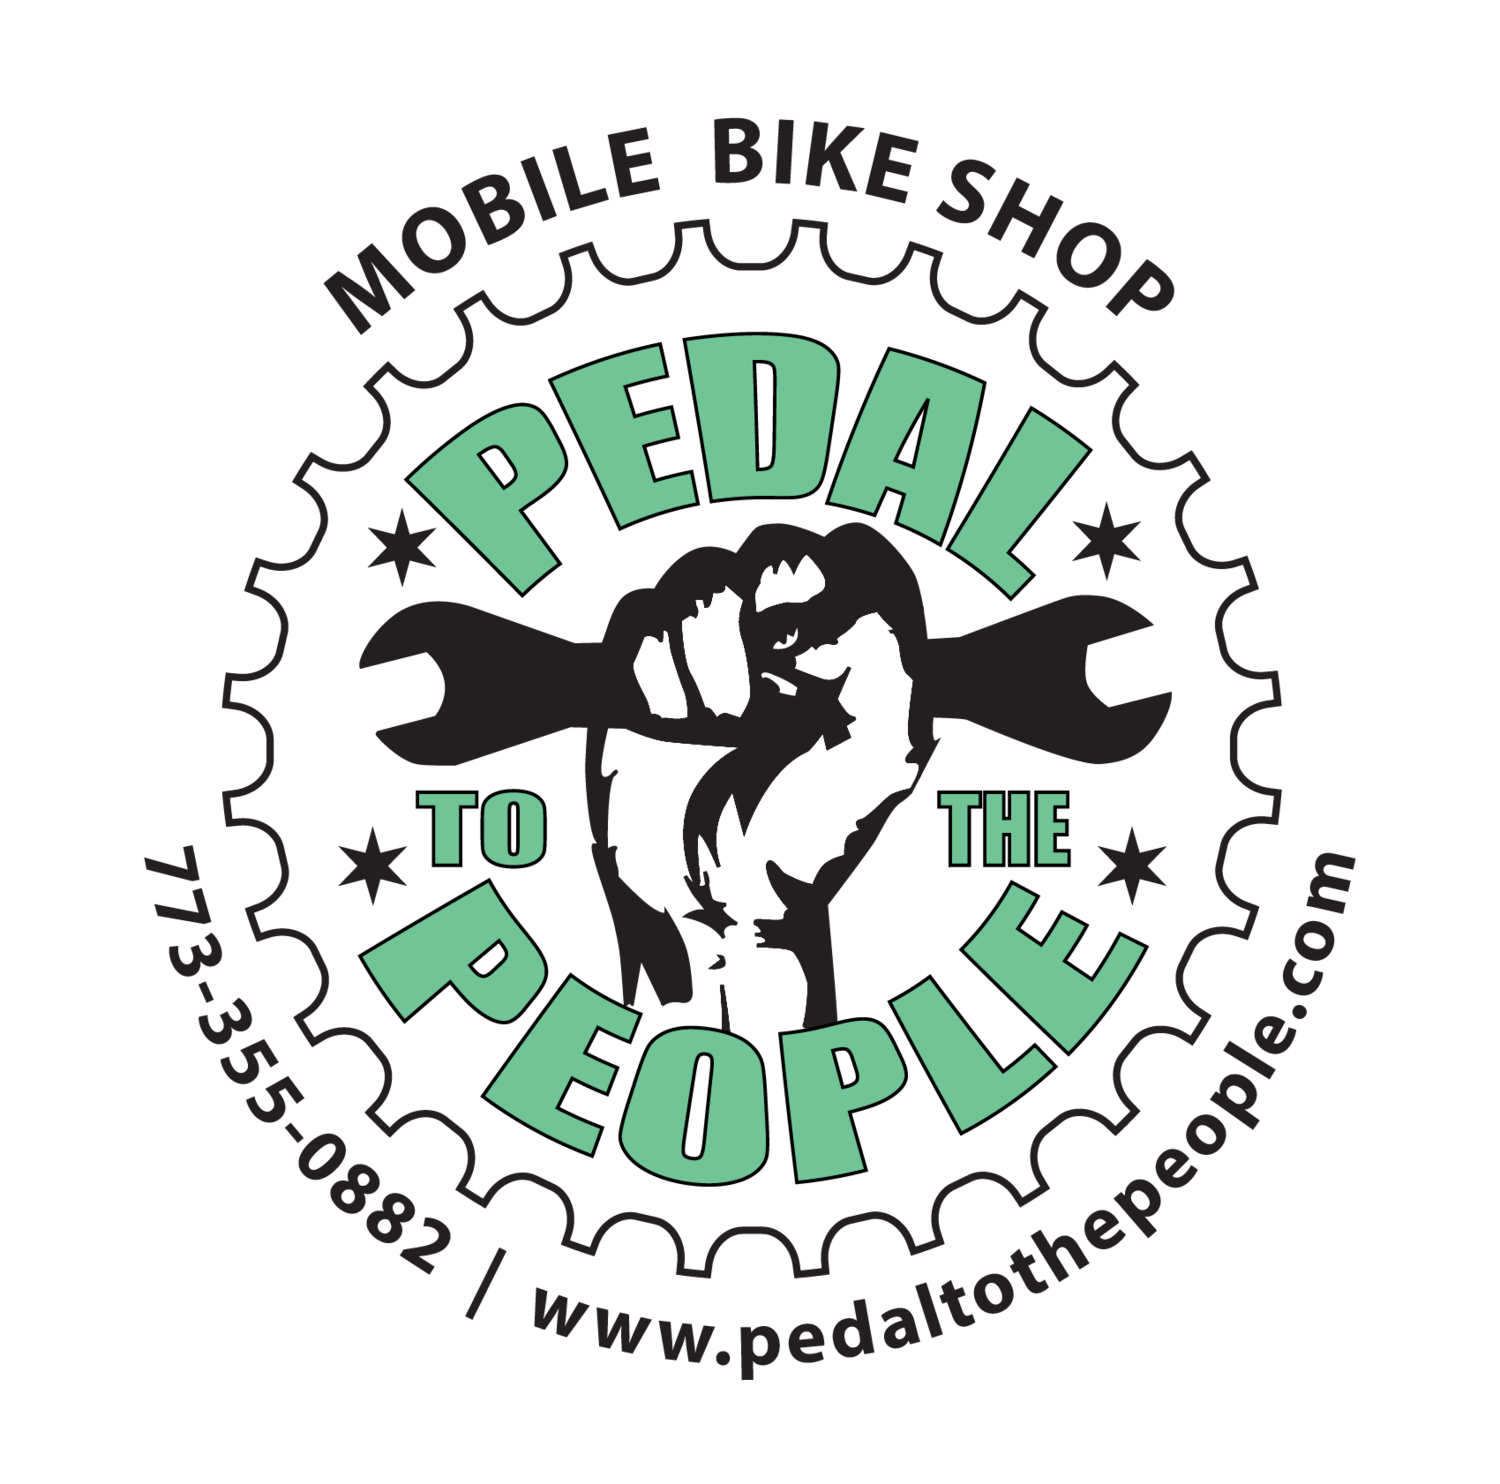 Pedal To The People